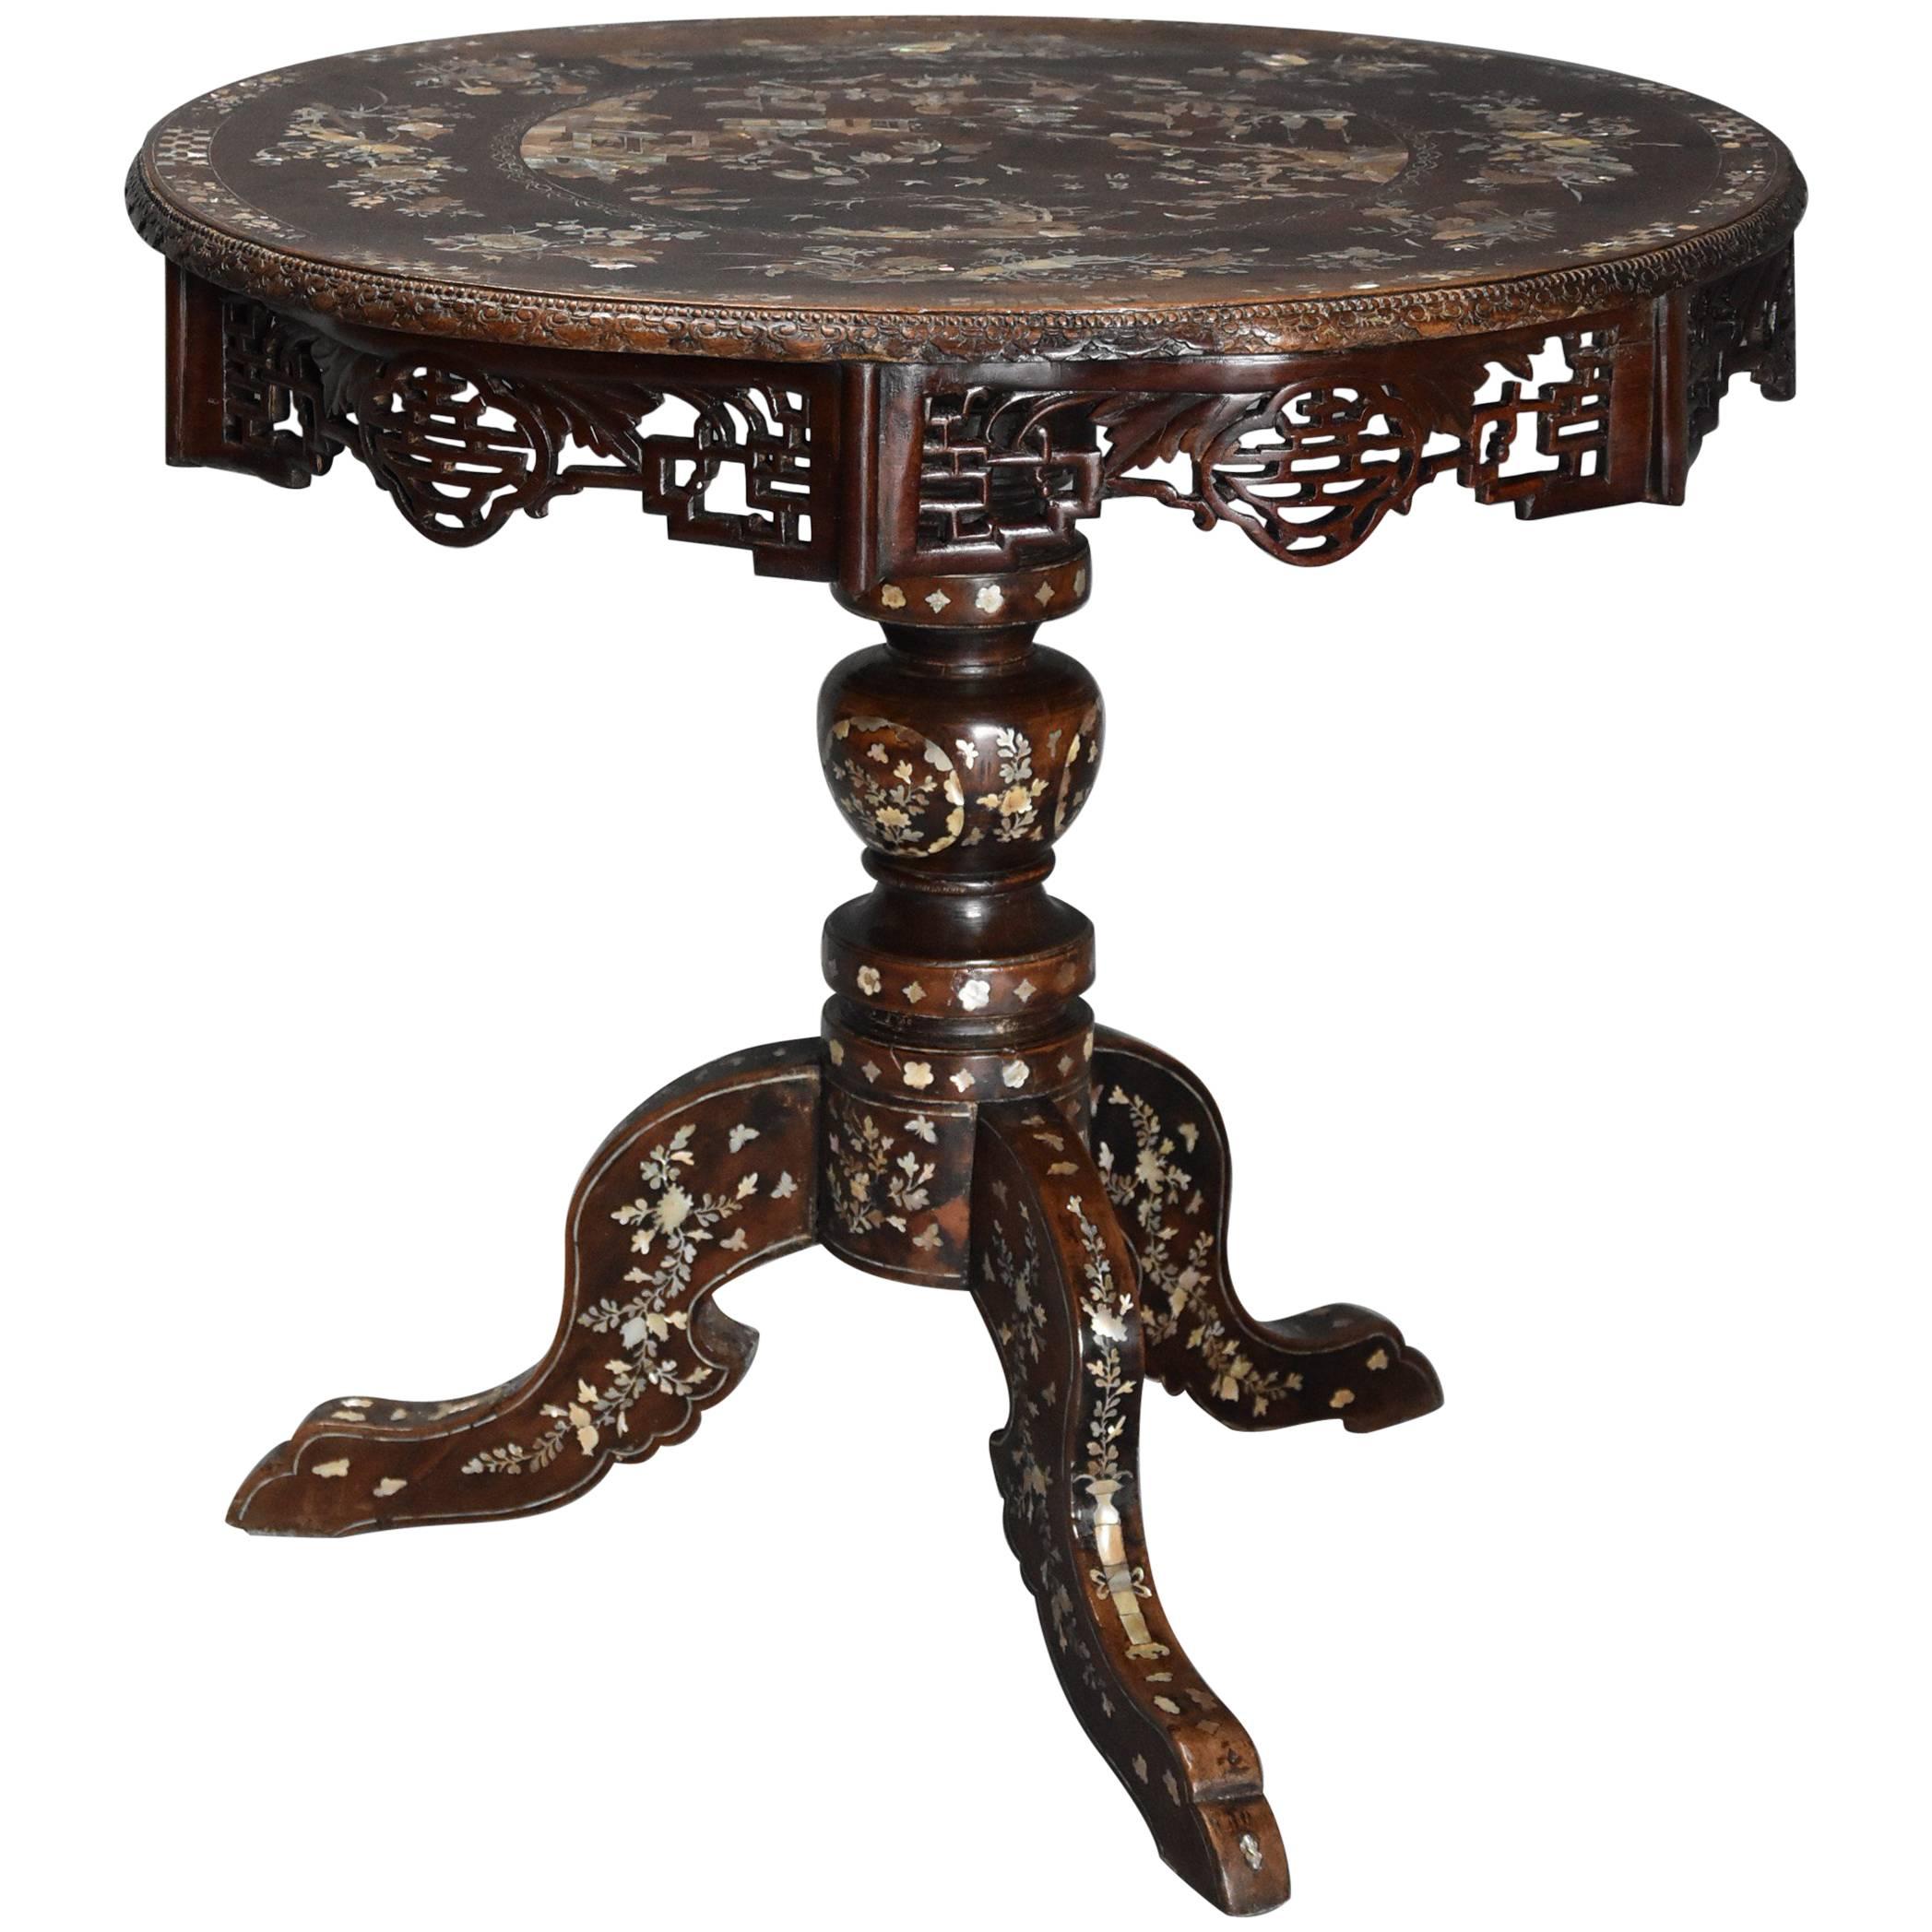 Decorative Vietnamese Hardwood & Mother-of-pearl Circular Centre Table For Sale